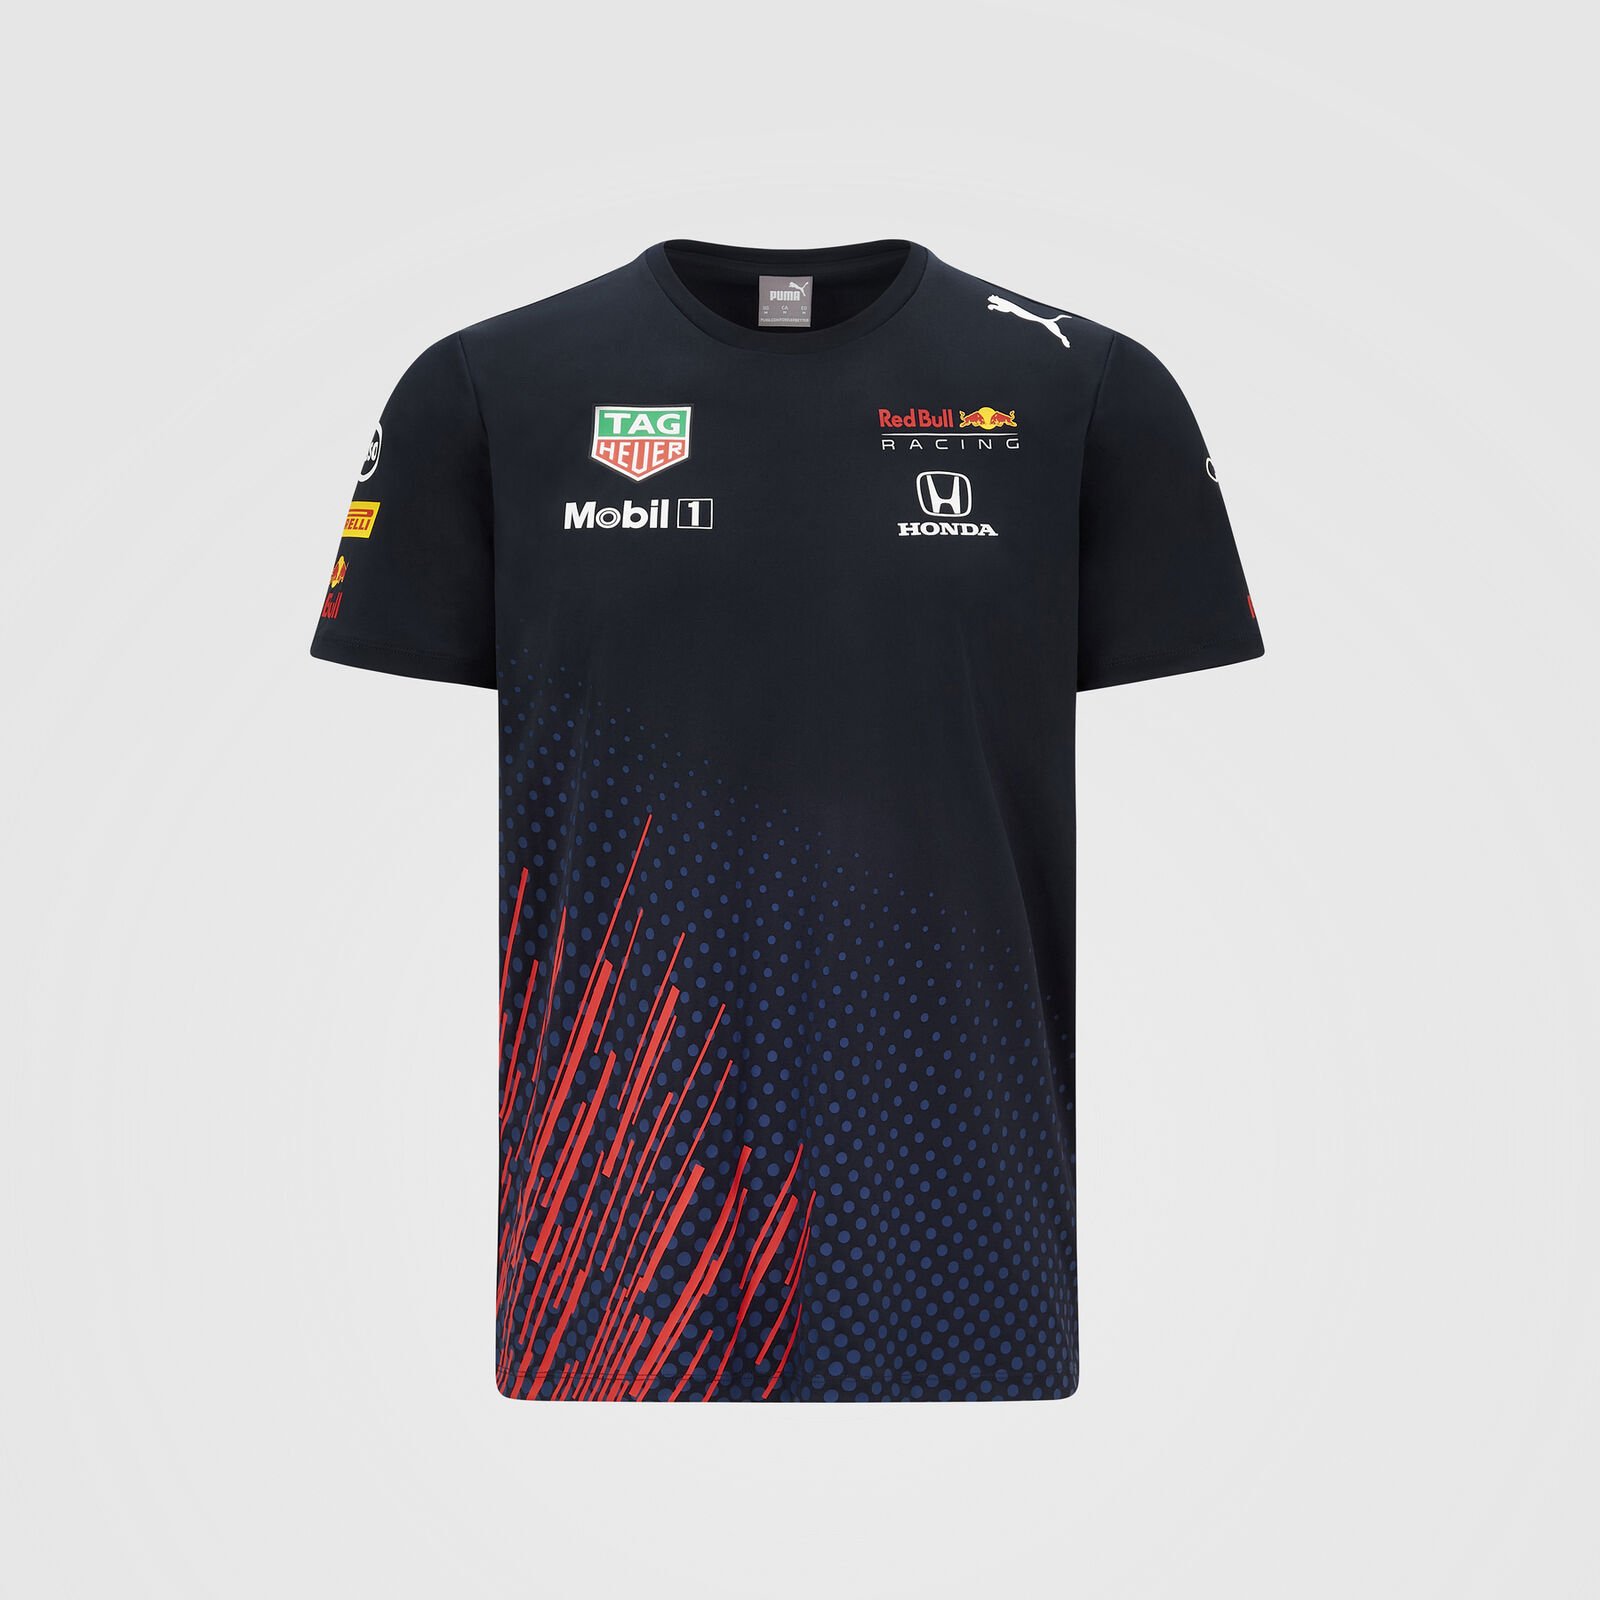 21 Team T Shirt Red Bull Racing Fuel For Fans